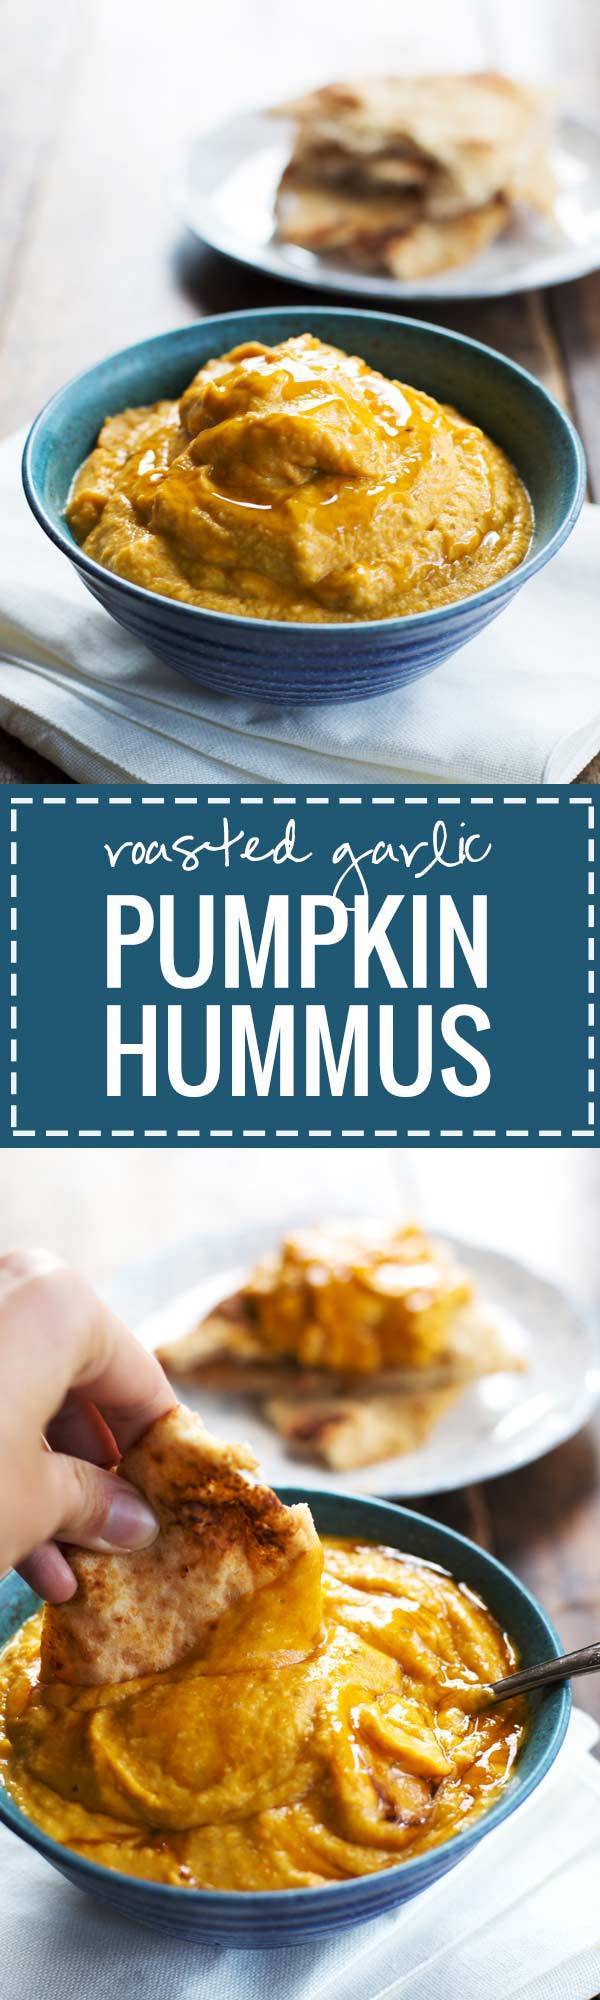 This Roasted Garlic & Rosemary Pumpkin Hummus has amazing flavor and just 100 calories! Takes 5 minutes and you can serve it with pita bread, veggies, and other snacks | pinchofyum.com